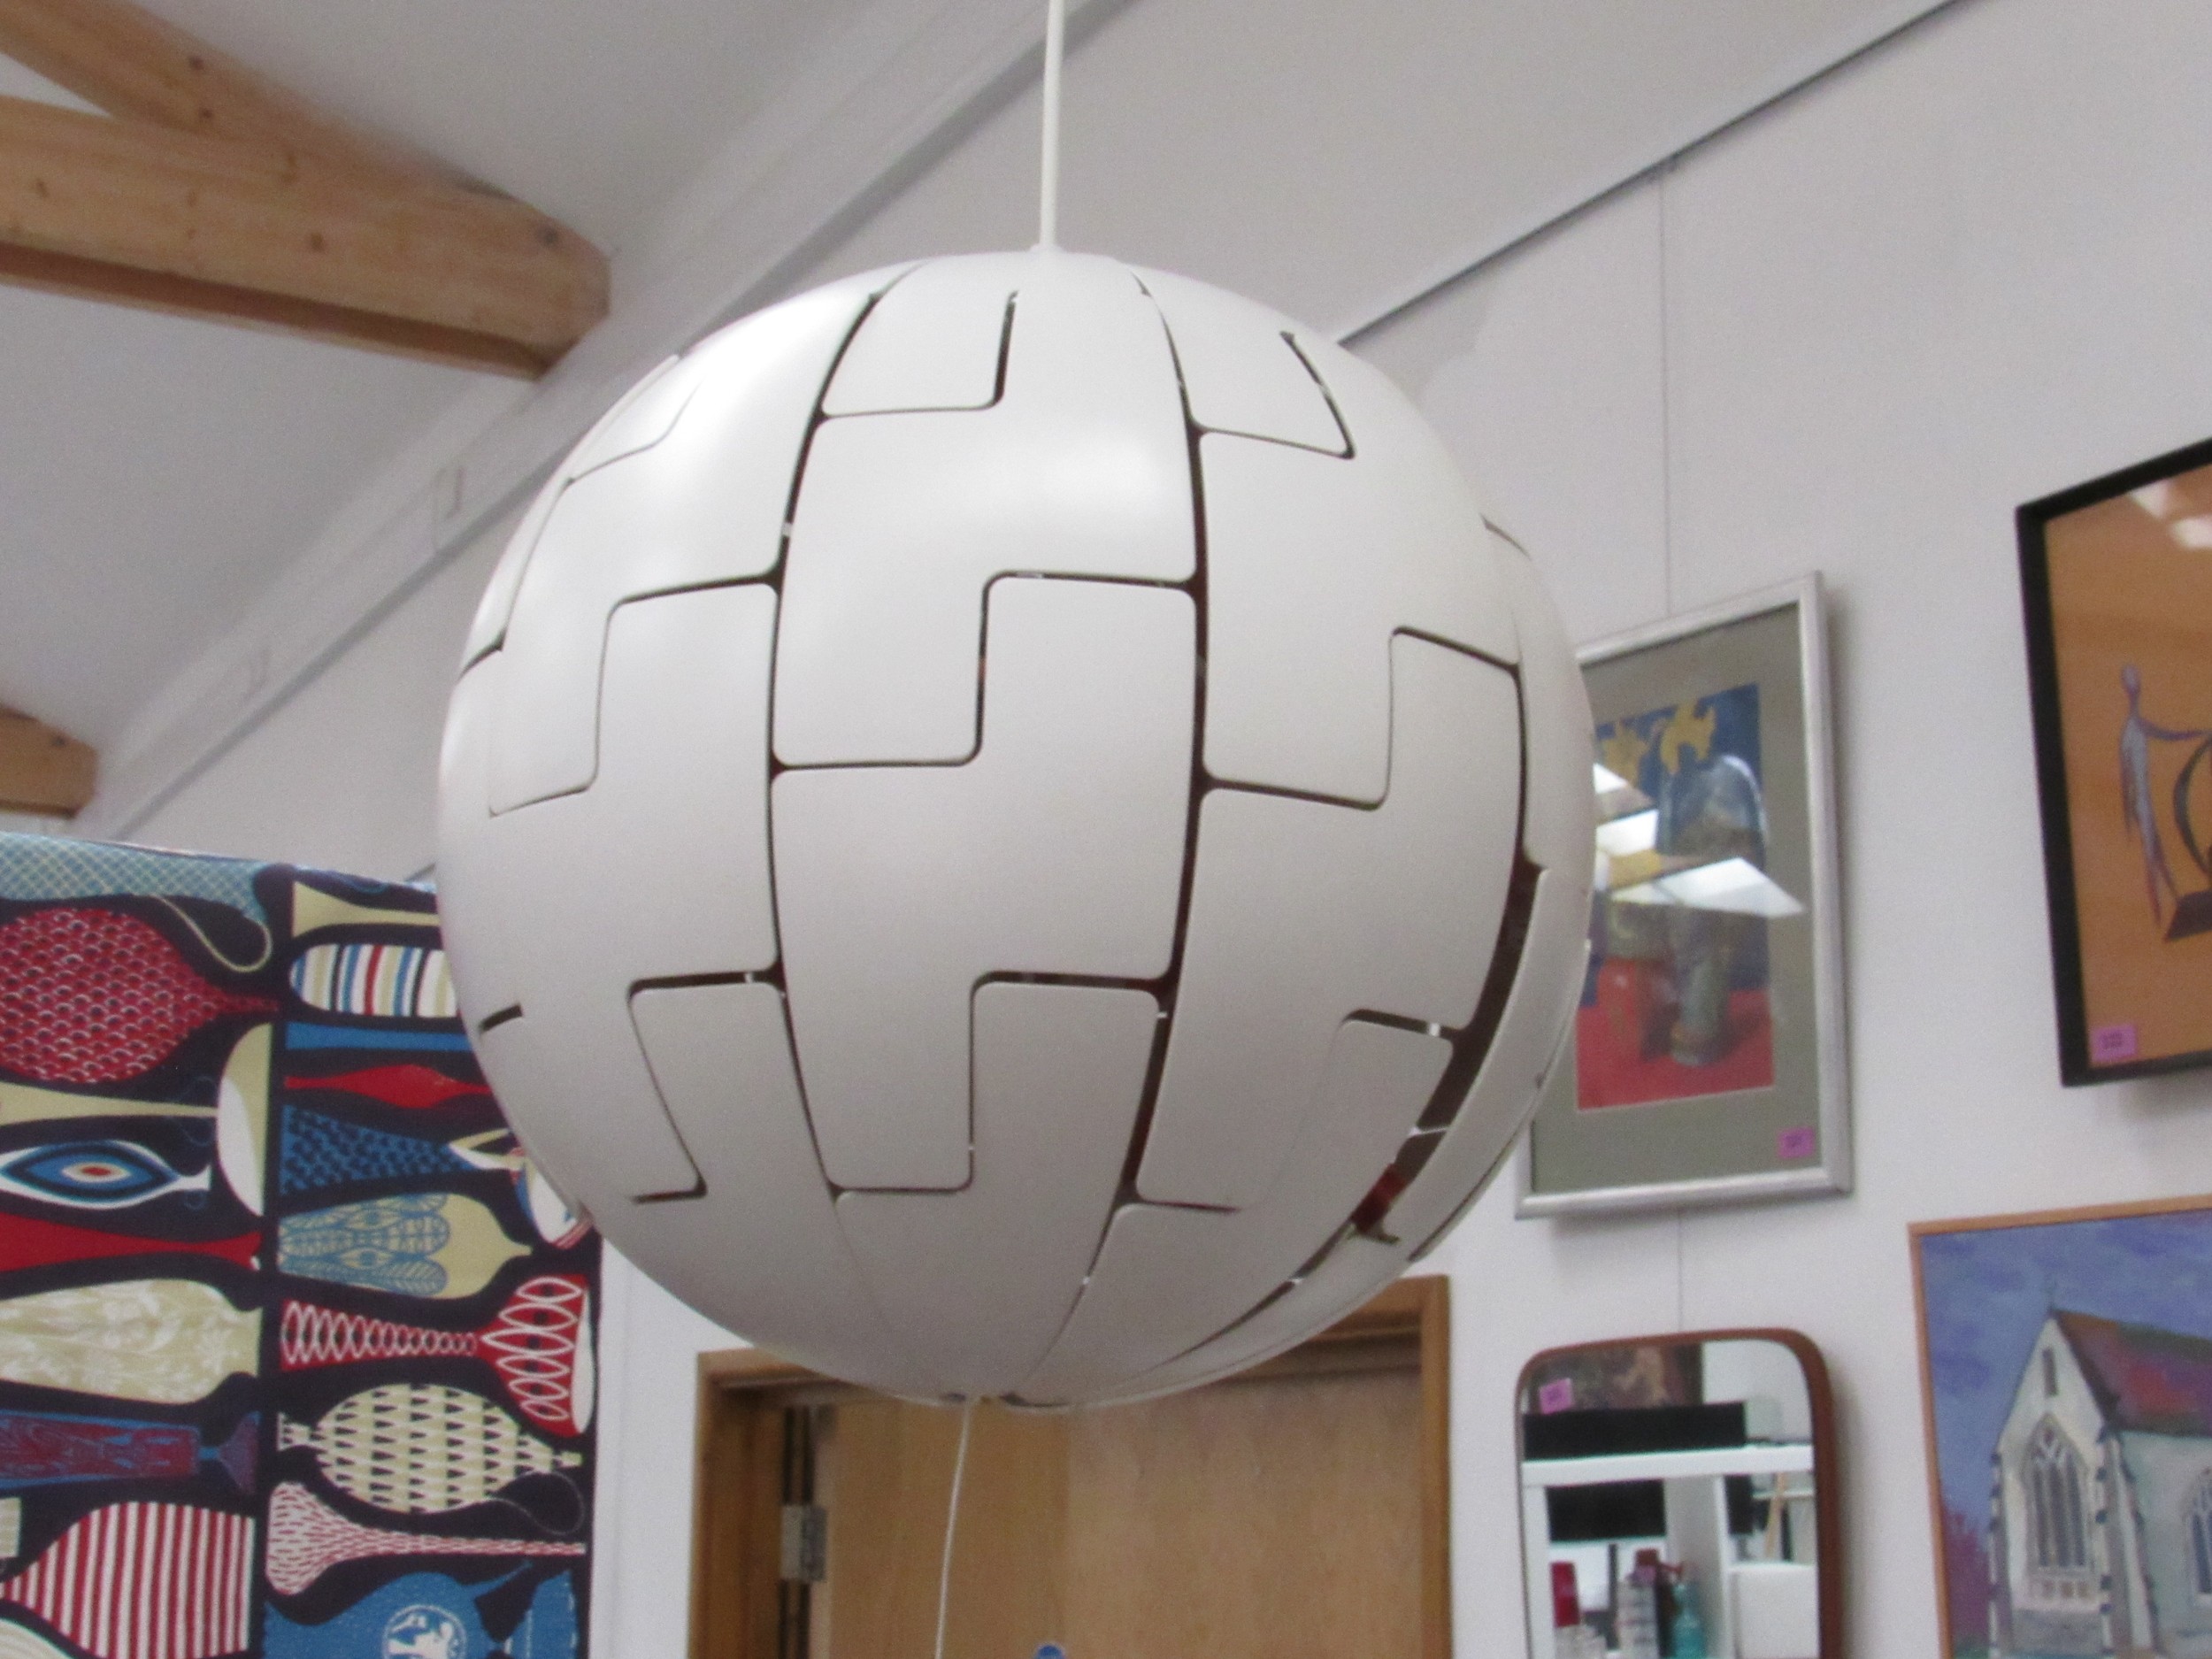 An Ikea 'Death Star' lampshade by David Wahl, approx 38cm high